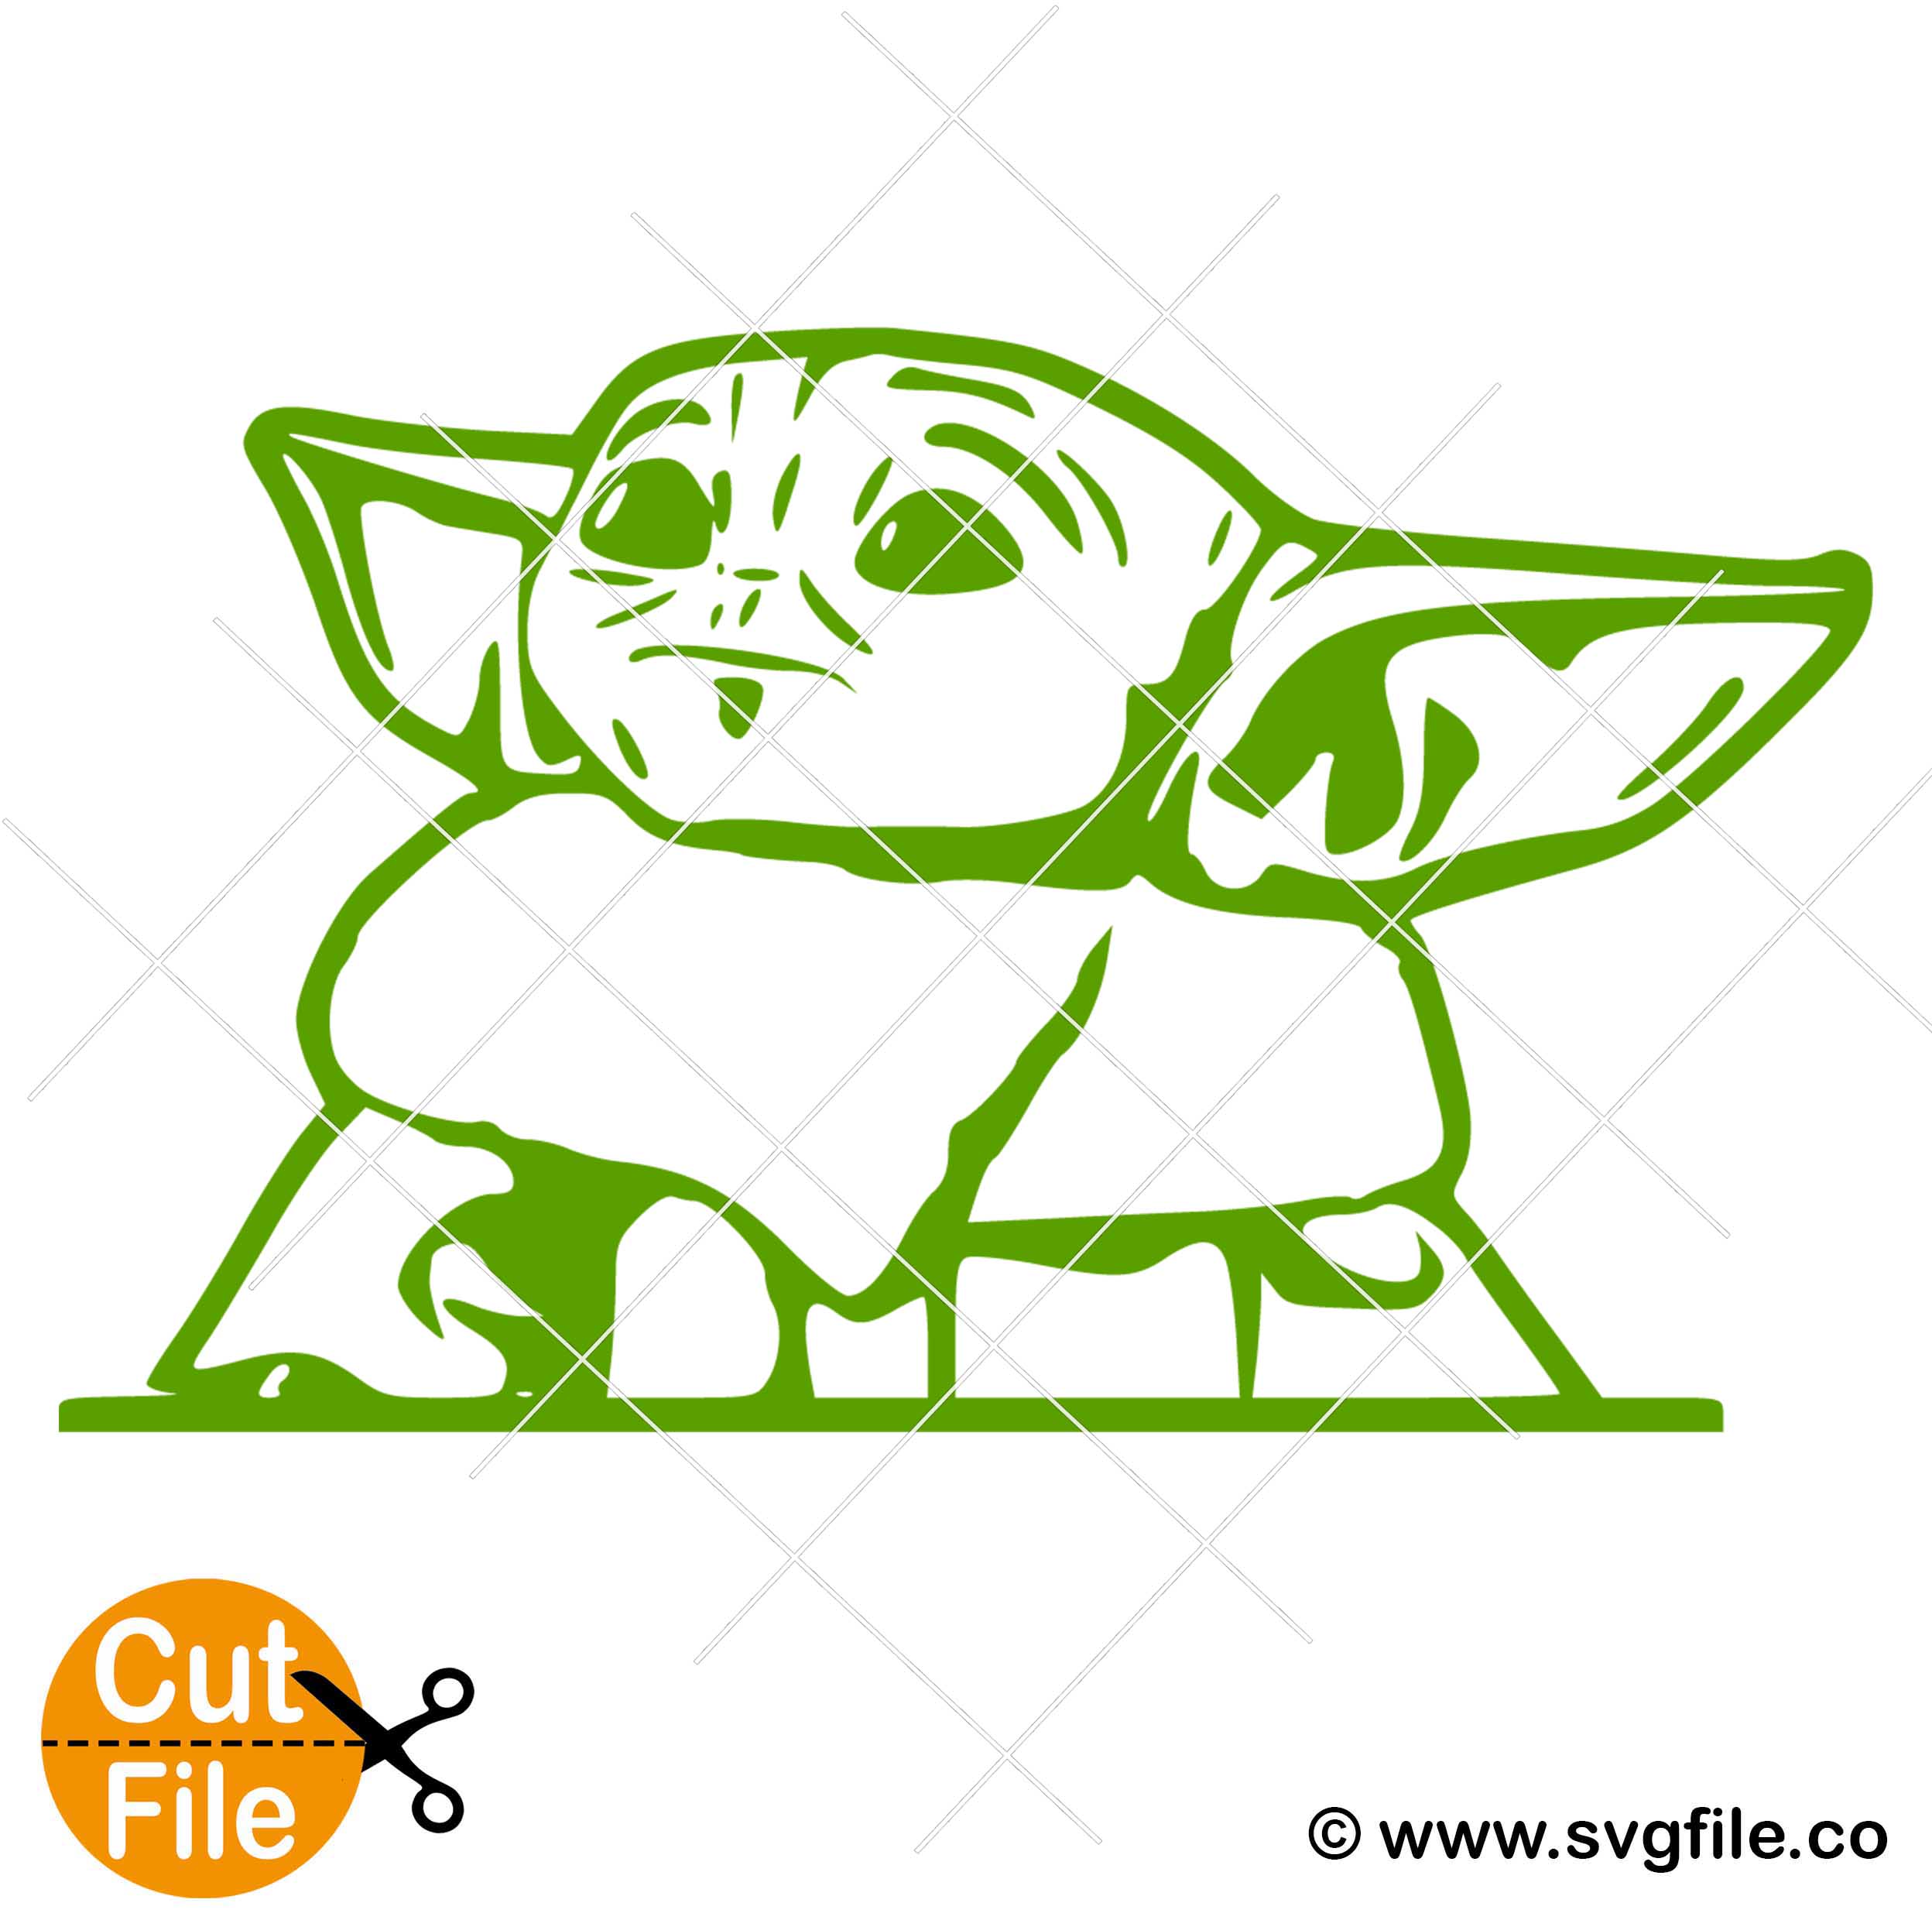 Download Baby Yoda Peek A Boo Svg Svgfile Co 0 99 Cent Svg Files Life Time Access